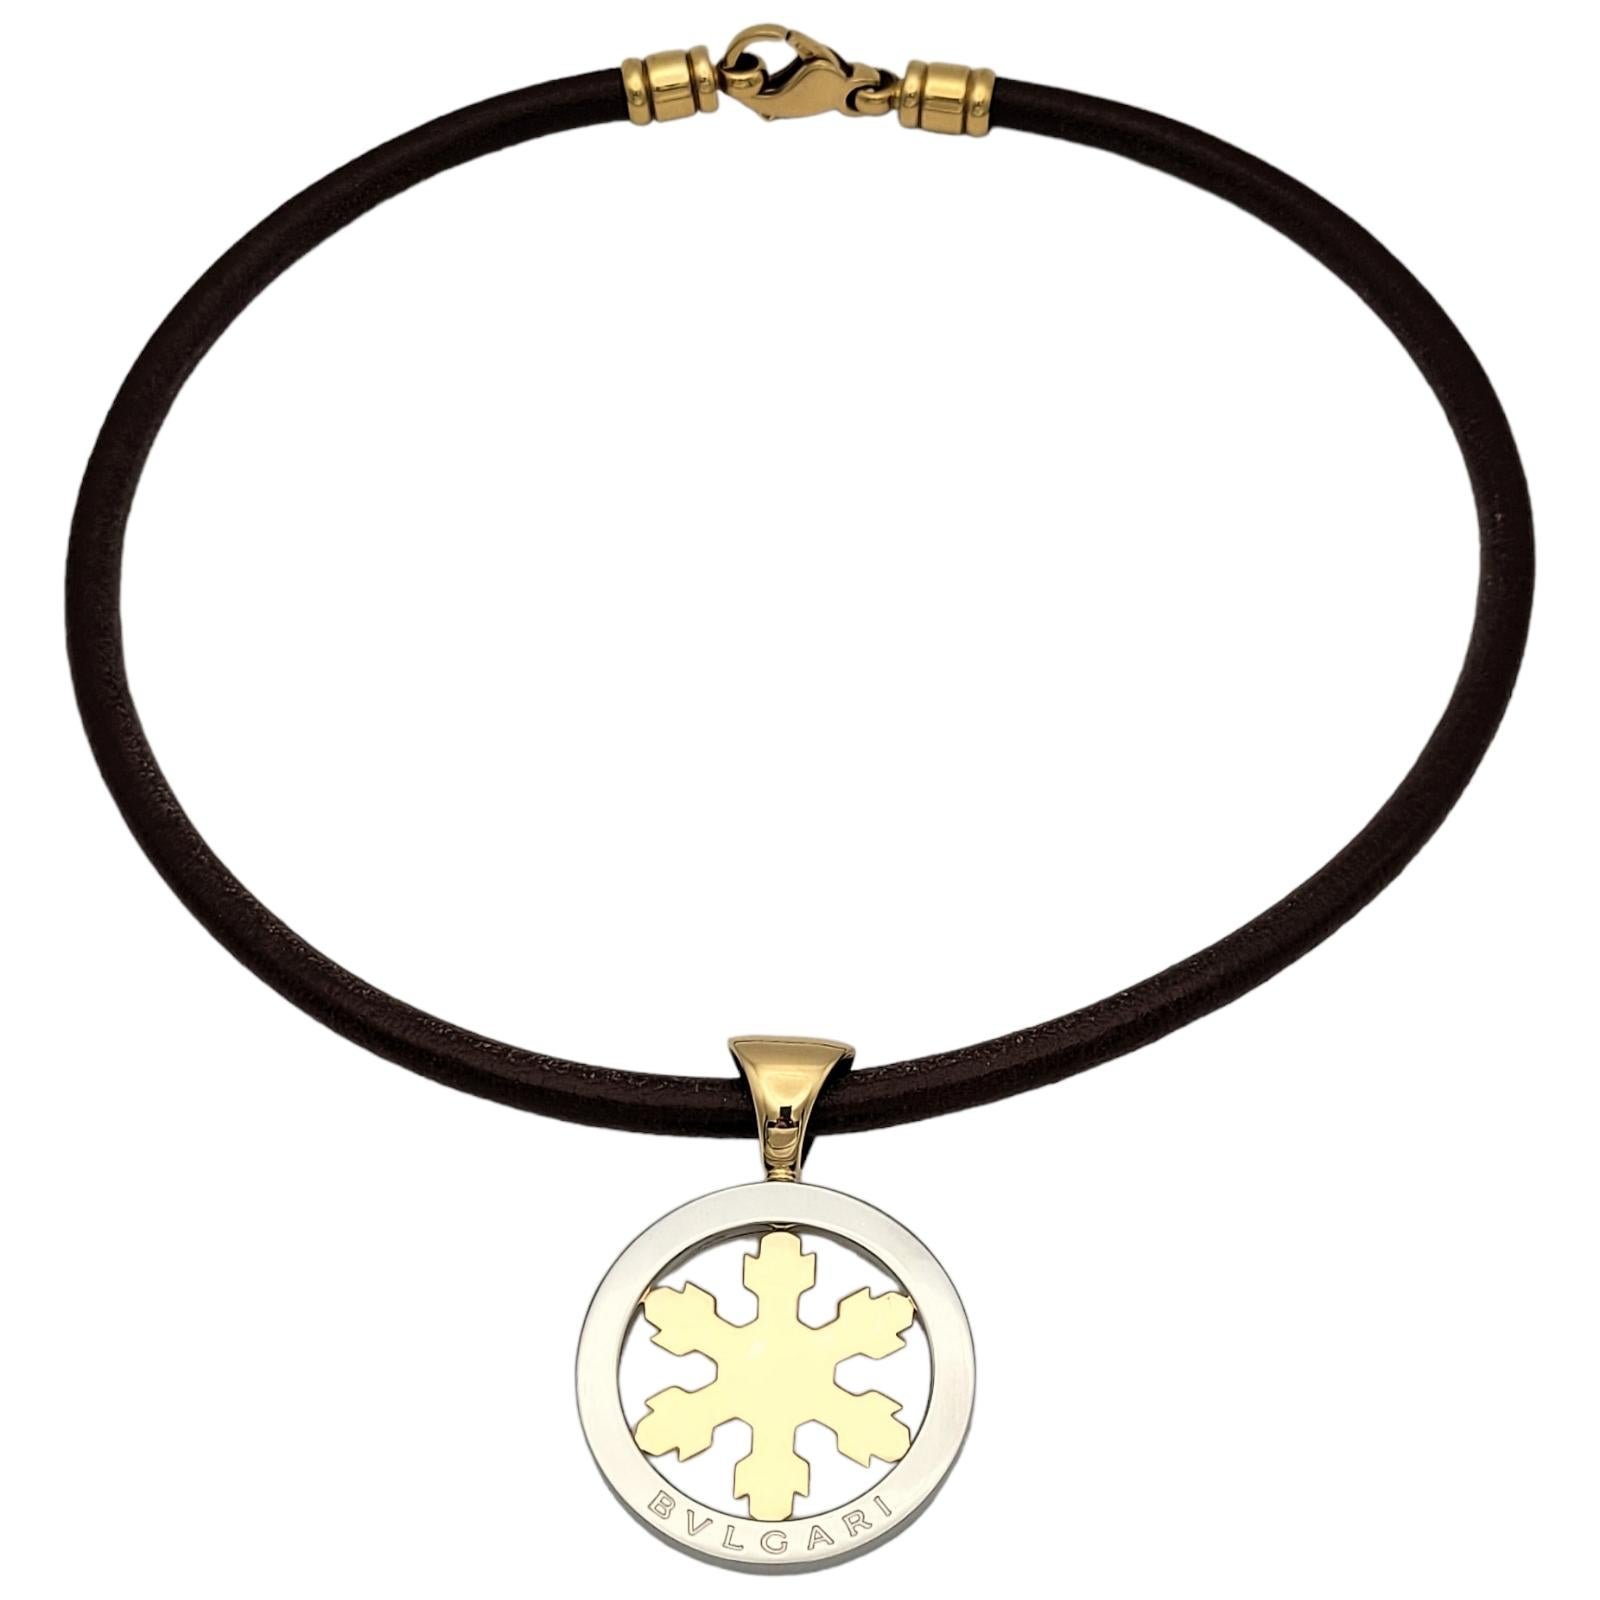 Women's Bvlgari Tondo Snowflake Leather Necklace in 18k Yellow Gold & Stainless Steel